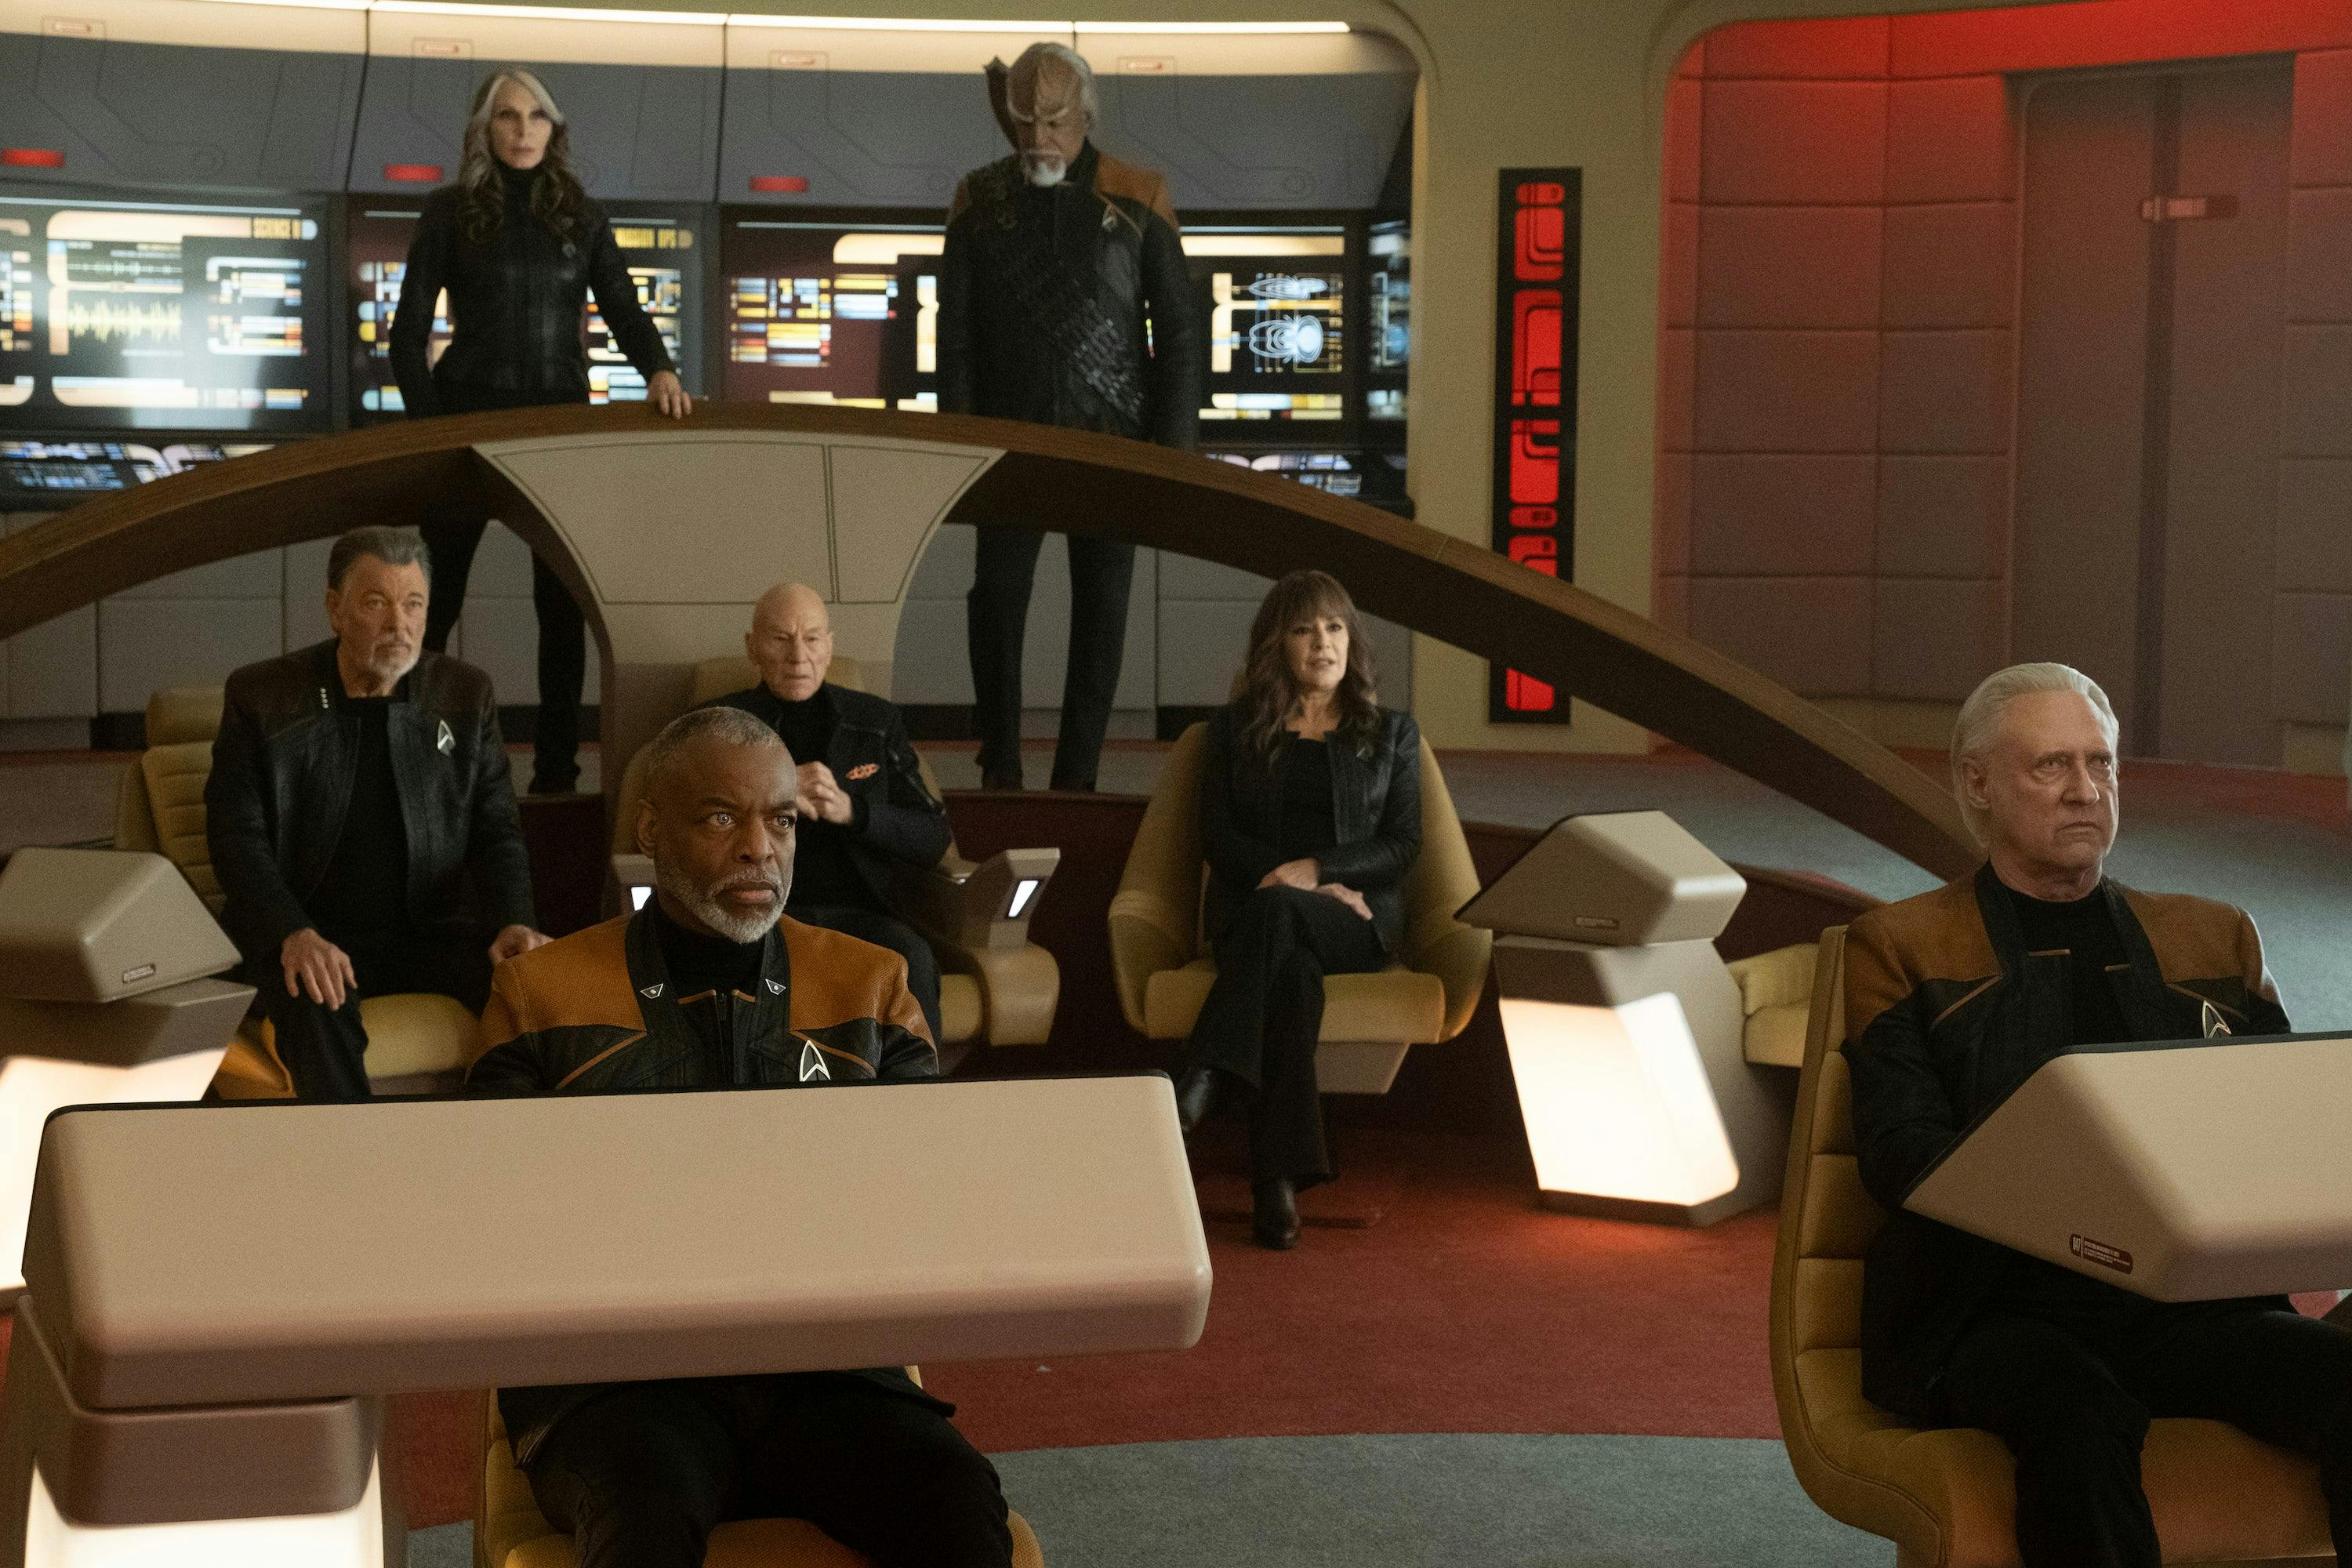 Beverly Crusher and Worf at the arch of the Enterprise-D bridge, at command are Will Riker, Jean-Luc Picard, and Deanna Troi, with Geordi La Forge at the helm and Data at tactical in 'The Last Generation'